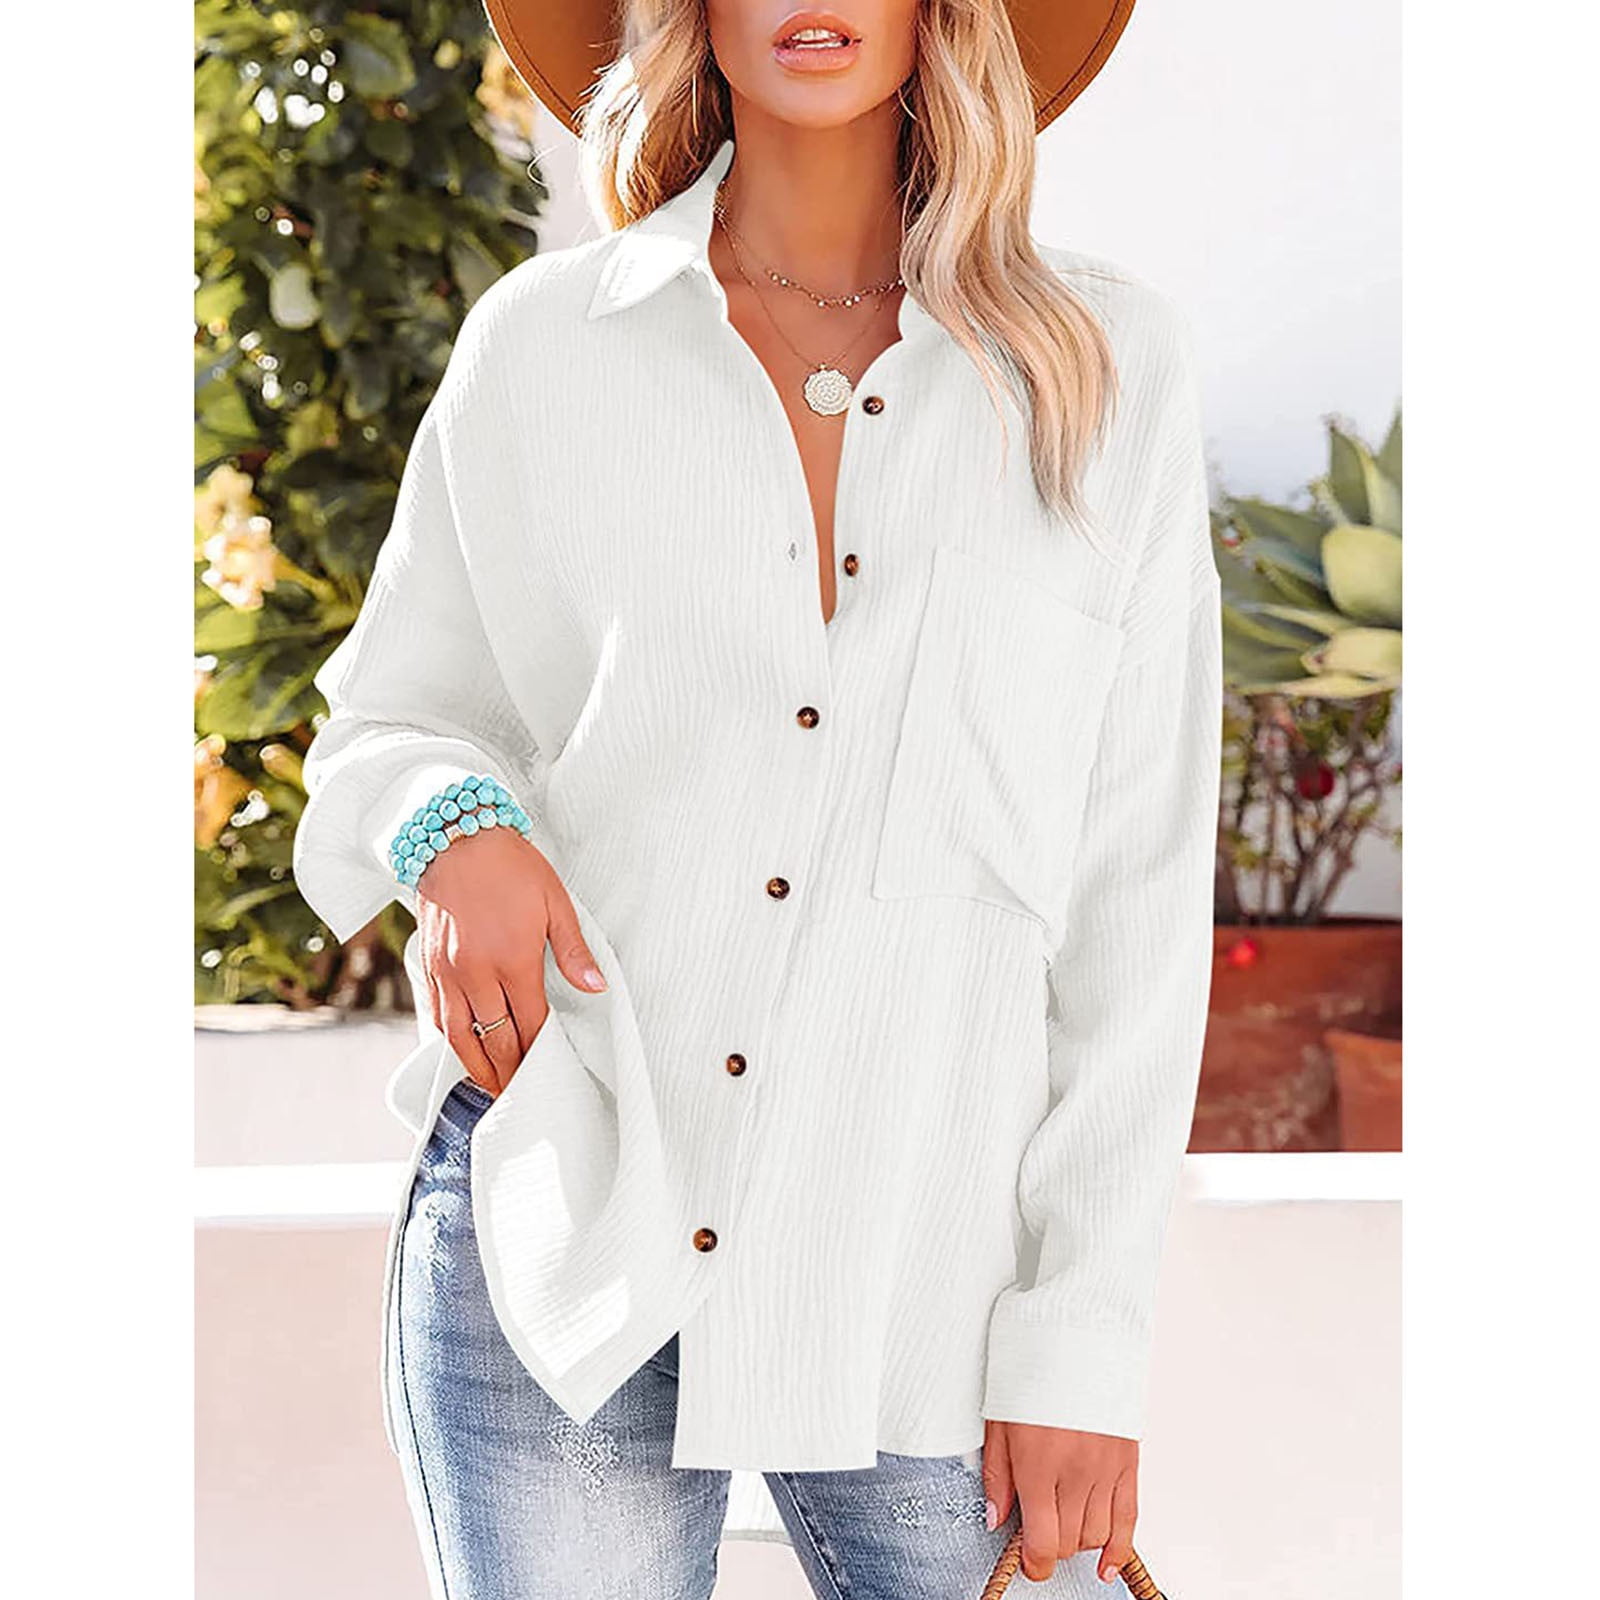 RYRJJ Womens Cotton Button Down Shirt Oversized Casual Long Sleeve Loose  Fit Collared Linen Work Blouse Tops with Pocket(White,S)